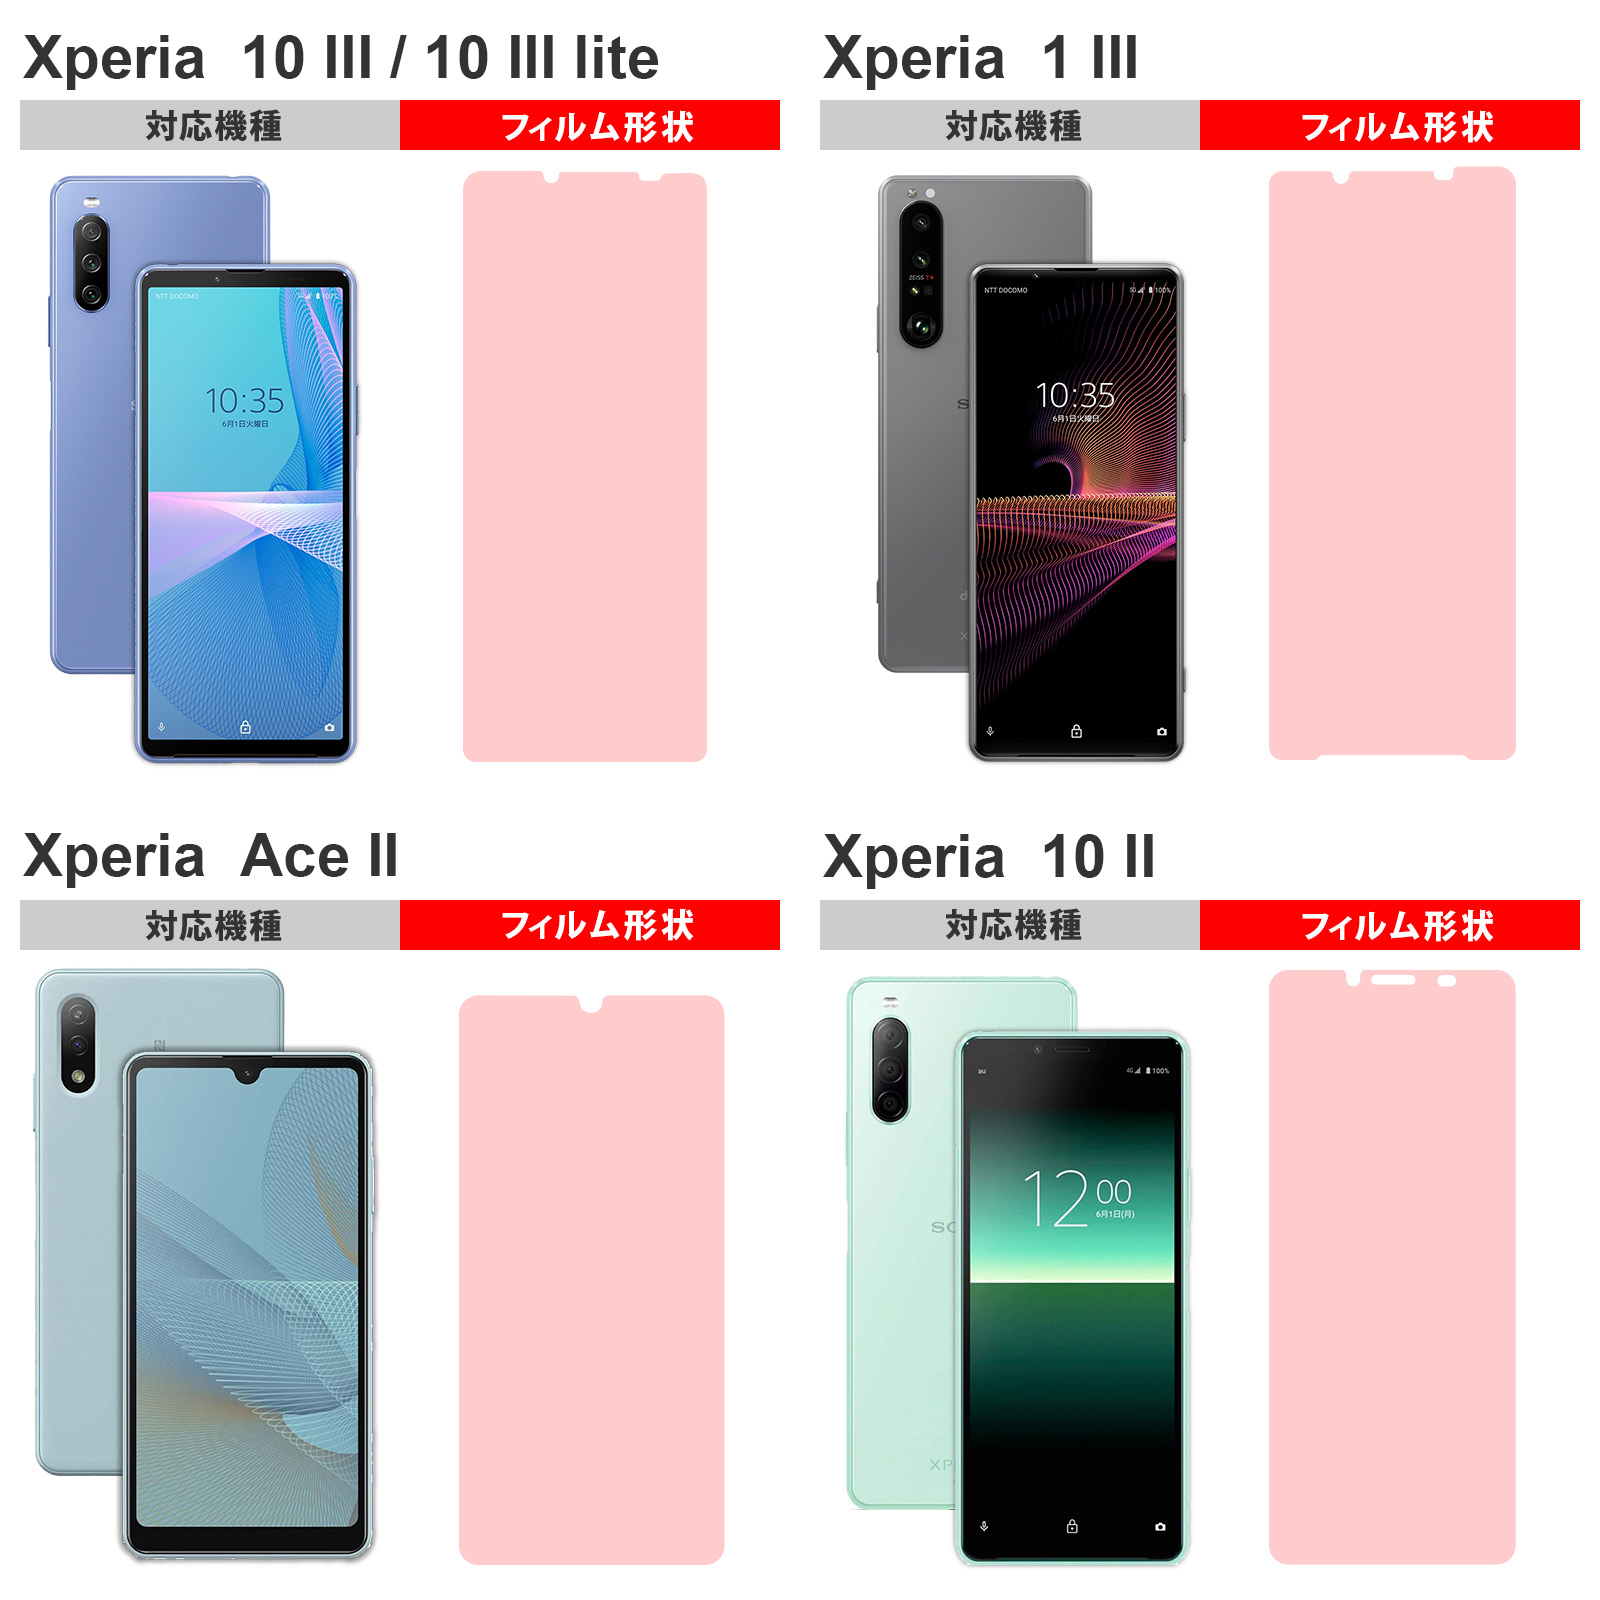 Xperia 5V 10V ガラス フィルム 1V 5 IV Ace III  エクスペリア マーク 1 IV 10 IV 5 Ace XZ3 XZ2 XZ クリア 気泡 画面 保護 液晶 フィルム 淵面 粘着 透明｜mywaysmart｜04